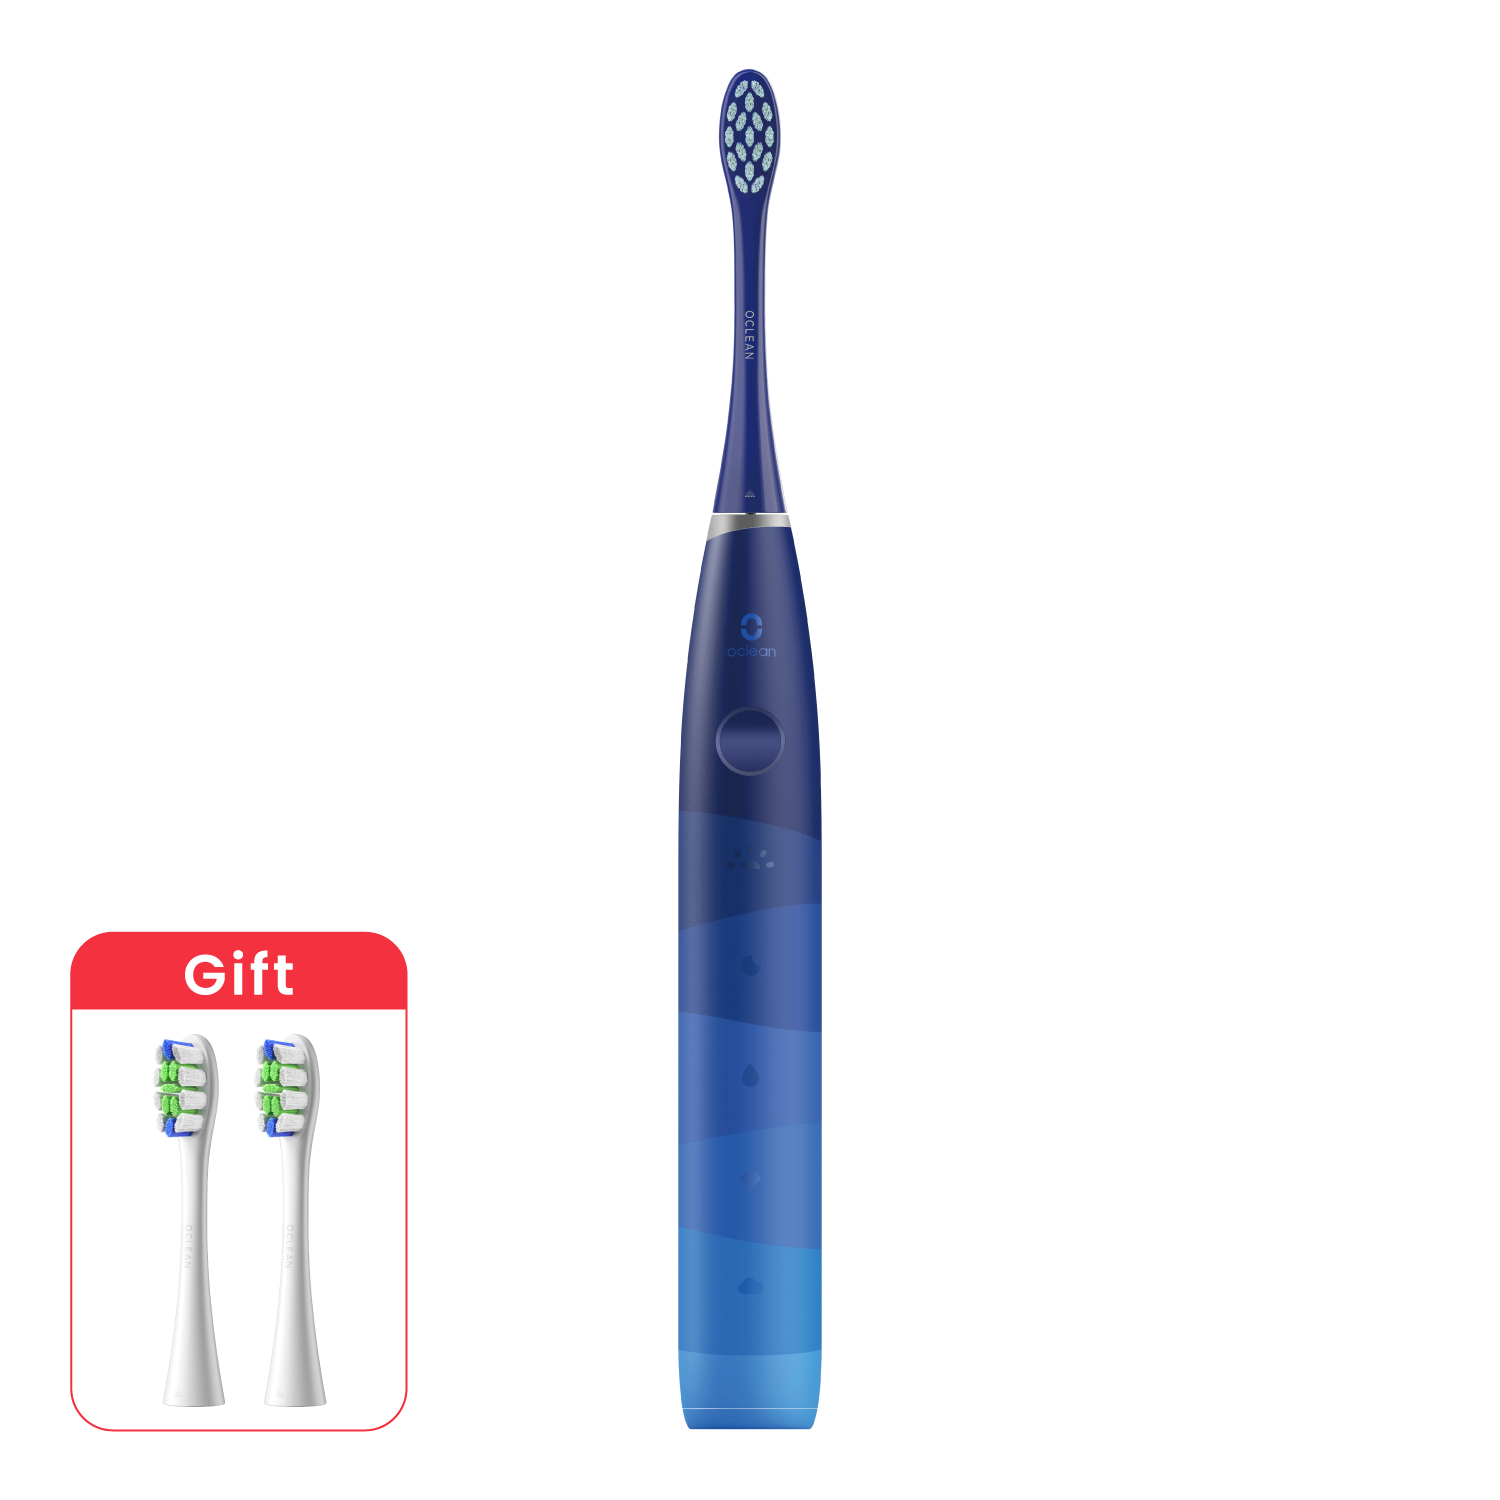 Oclean Flow Sonic Electric Toothbrush-Toothbrushes-Oclean US Store